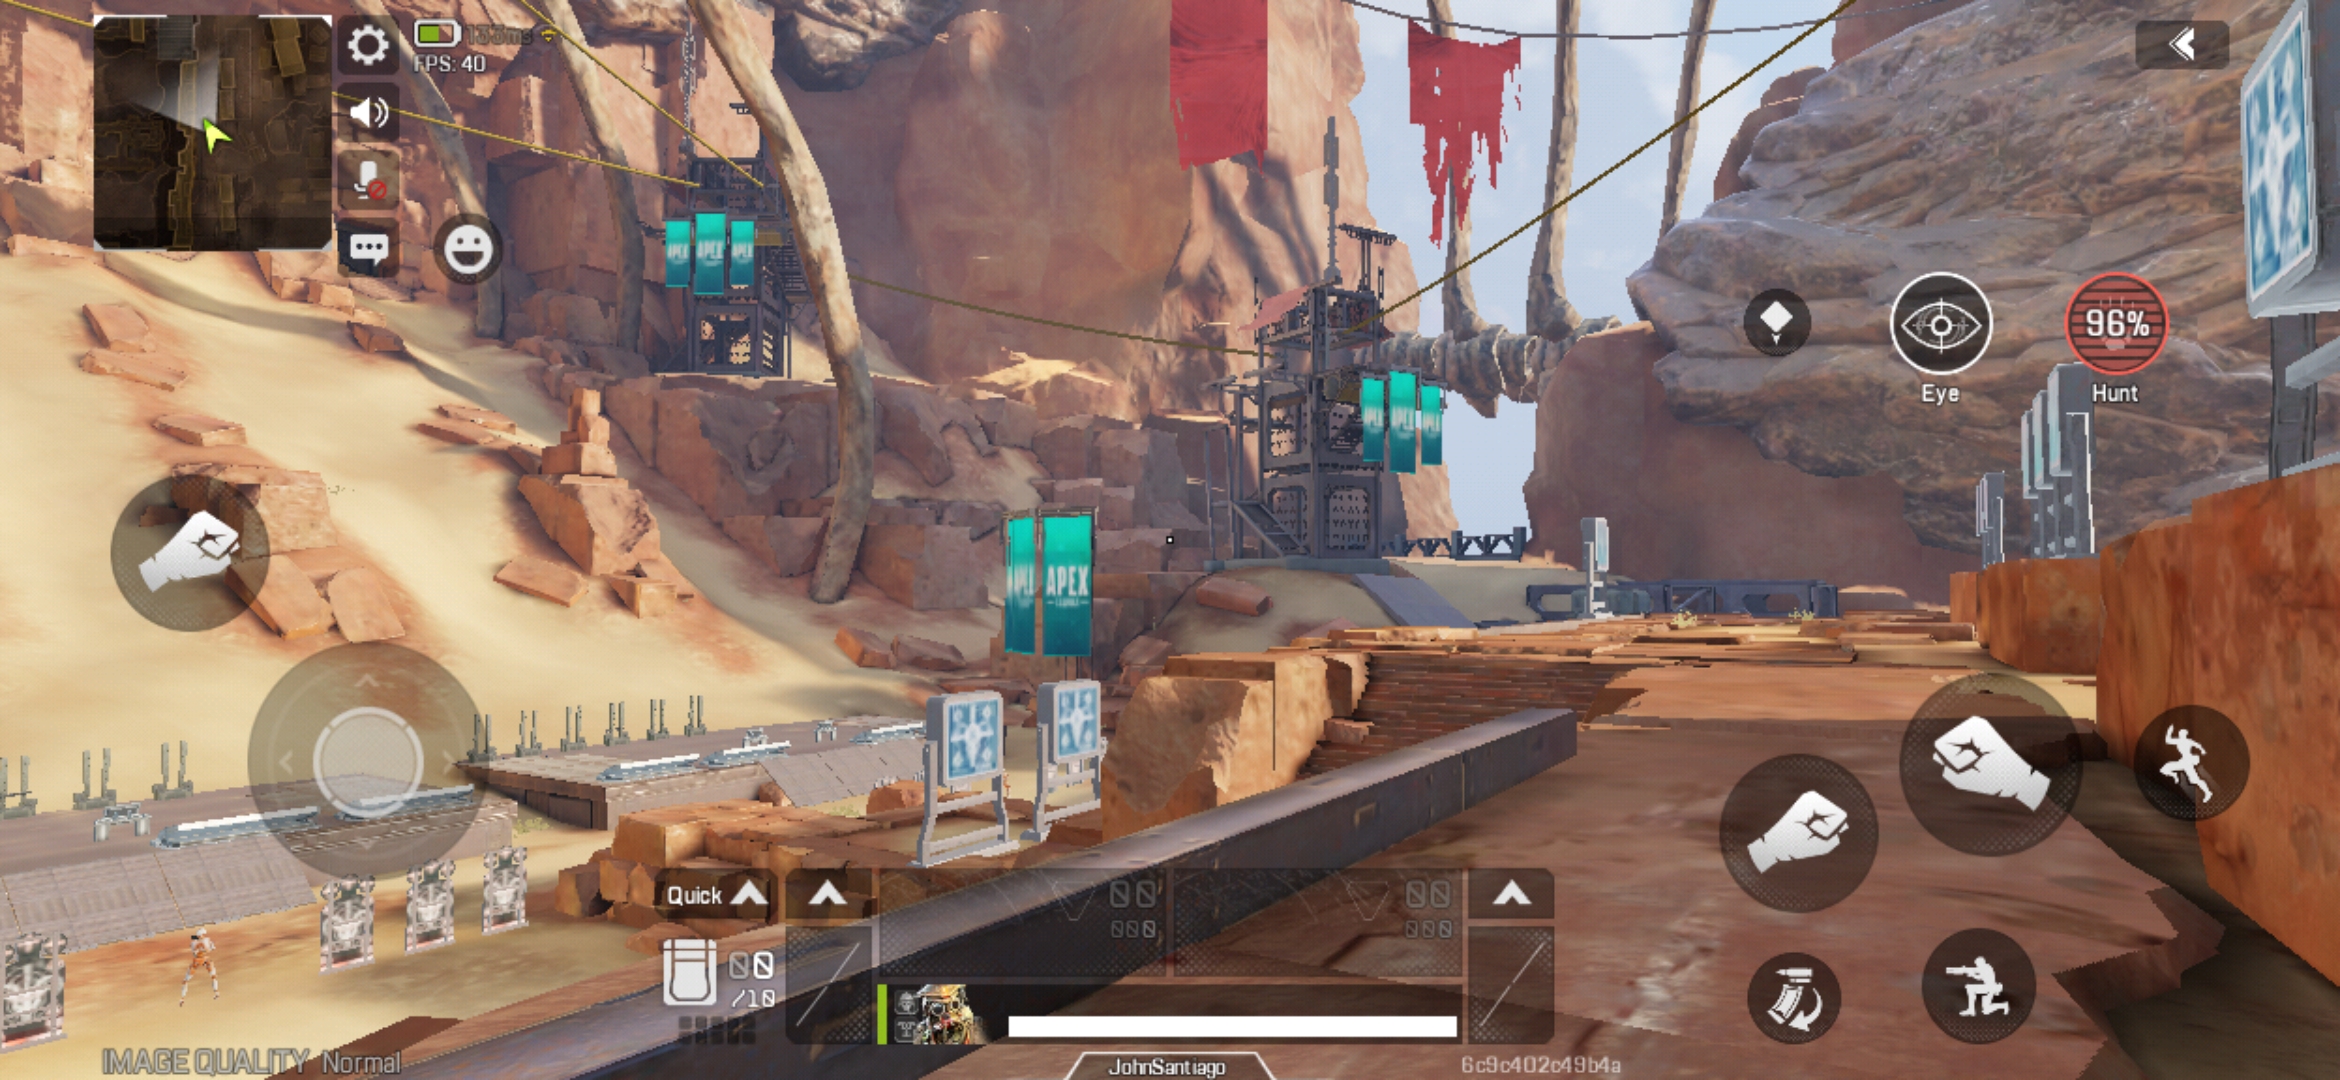 Apex Legends Mobile: How to Aim Using the Gyroscope